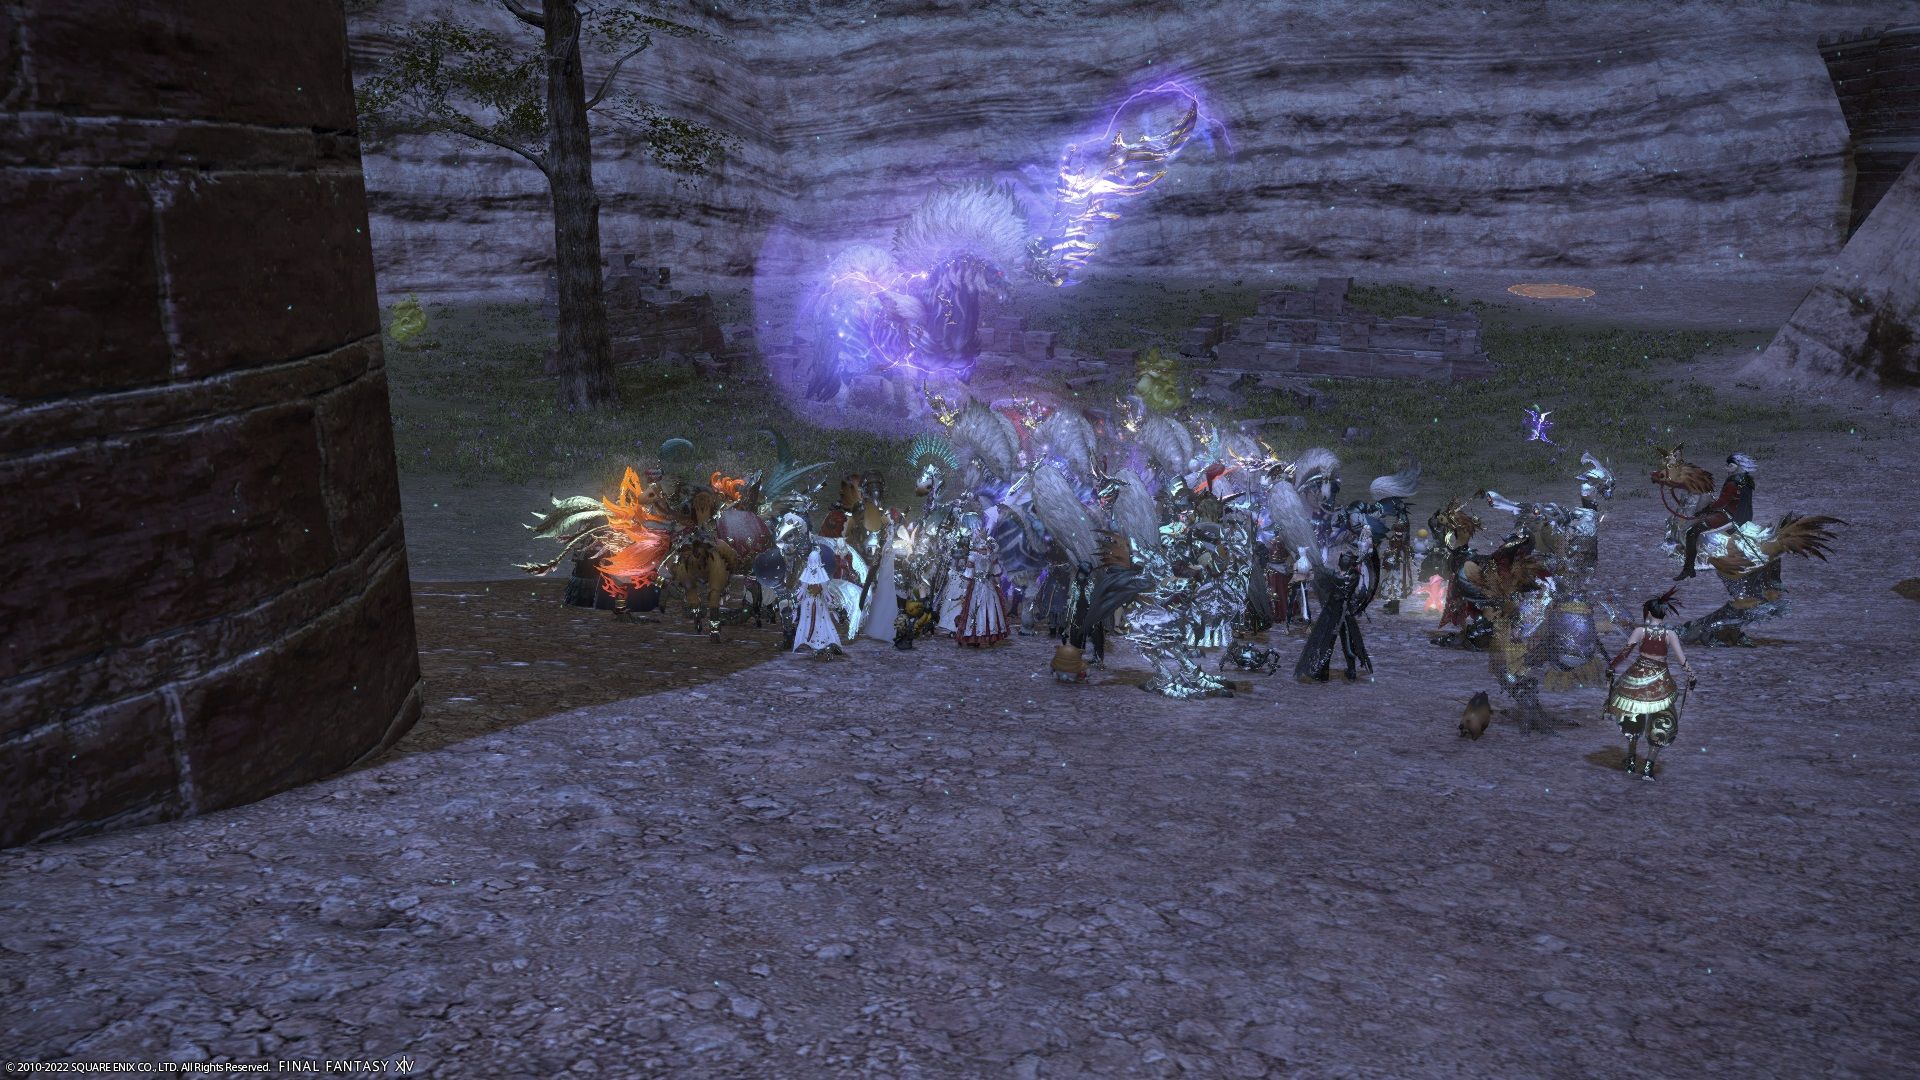 A group of players gathered for the Ixion FATE in Final Fantasy 14.